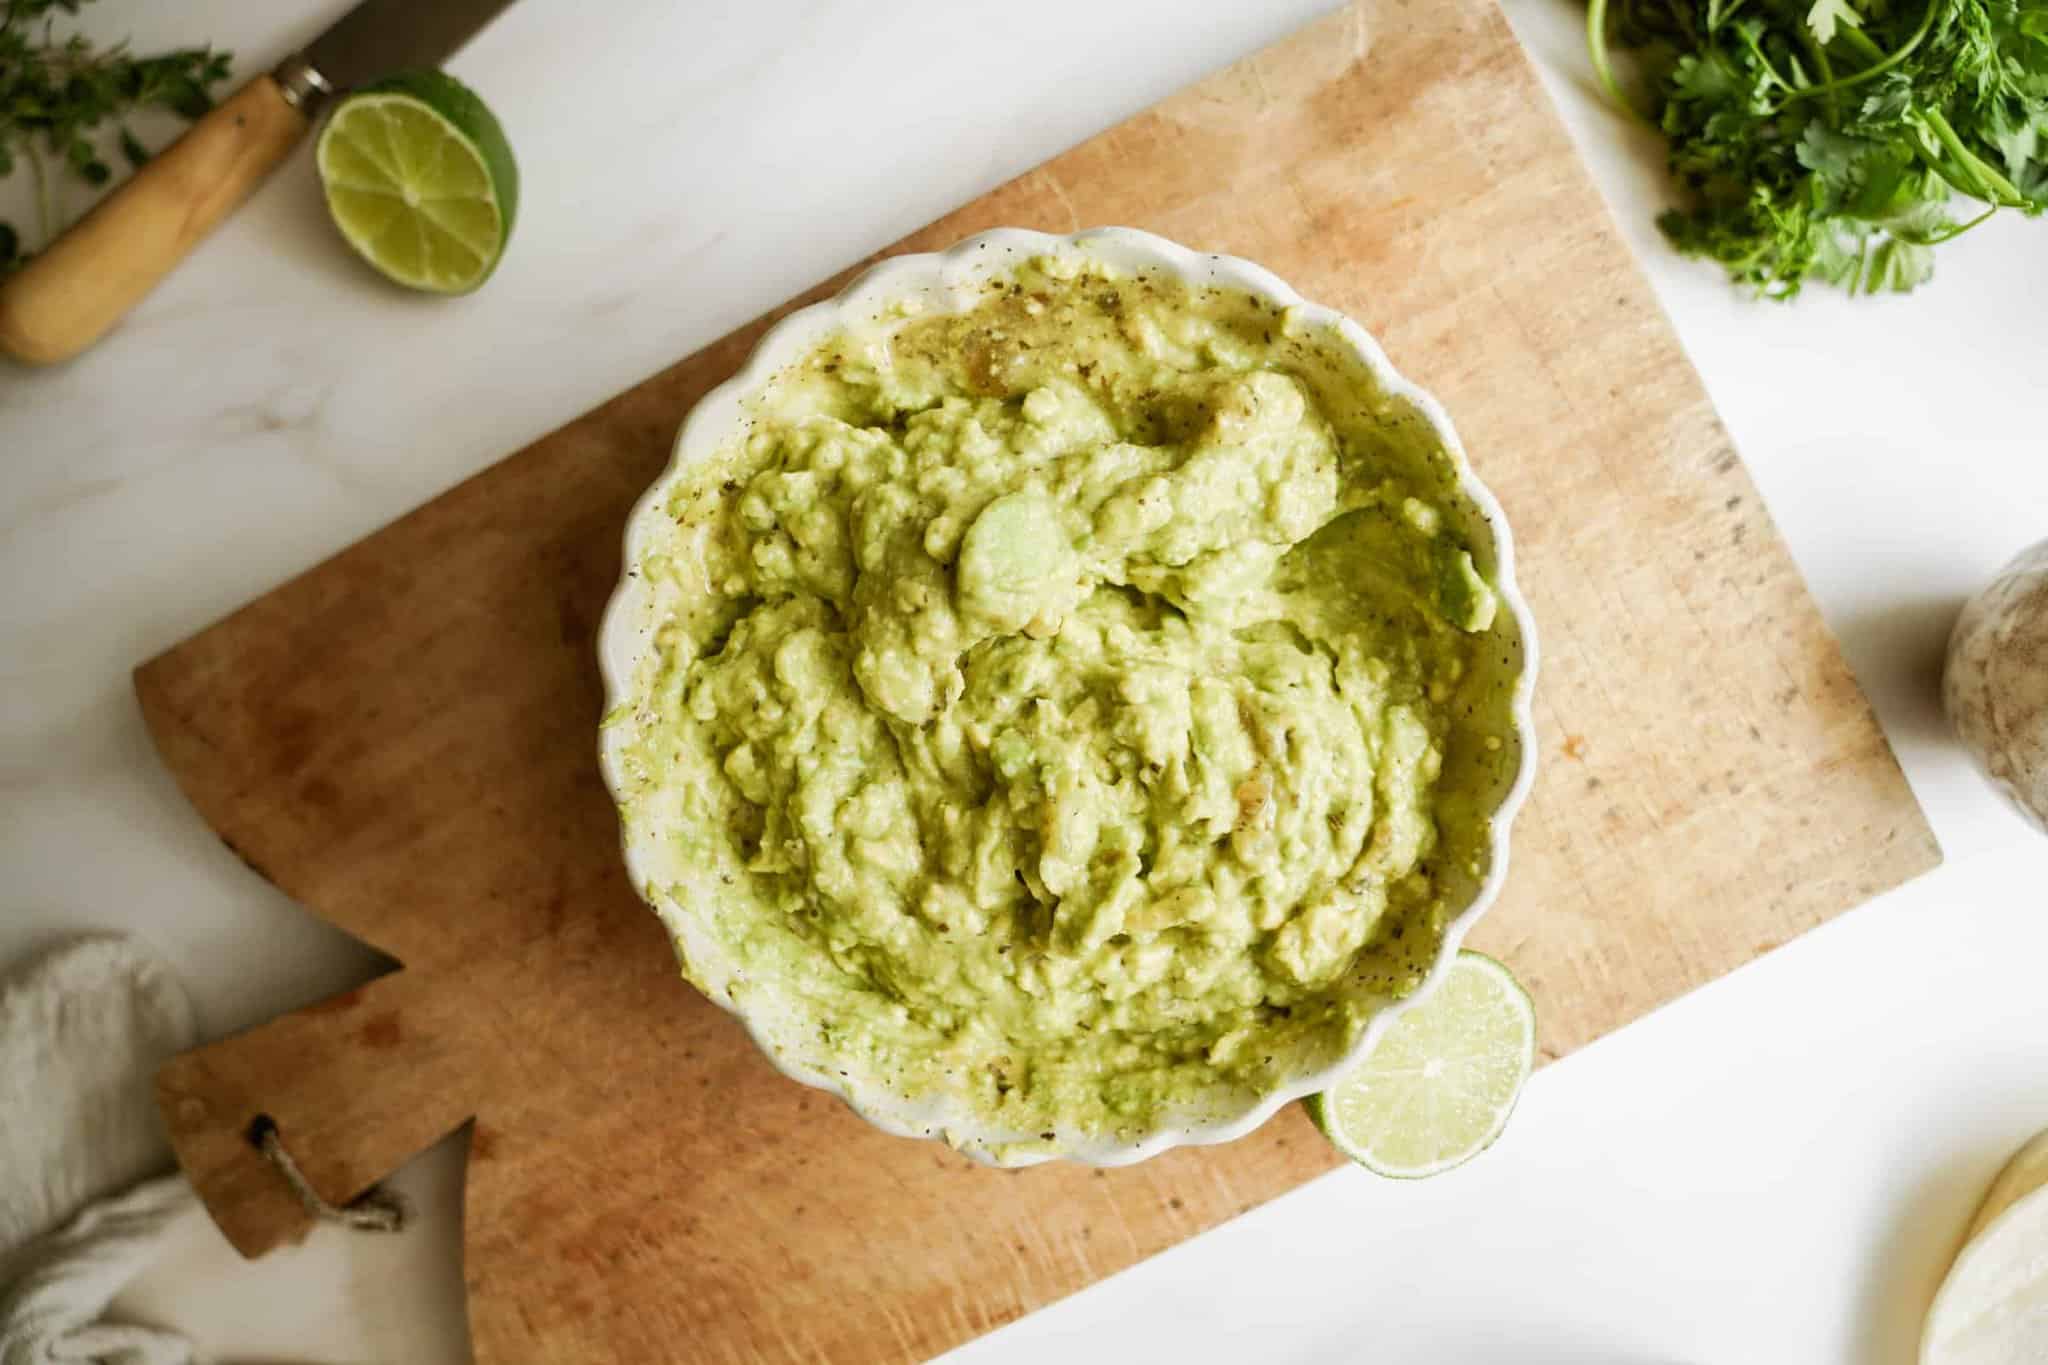 Mashed guacamole in a bowl on a cutting board